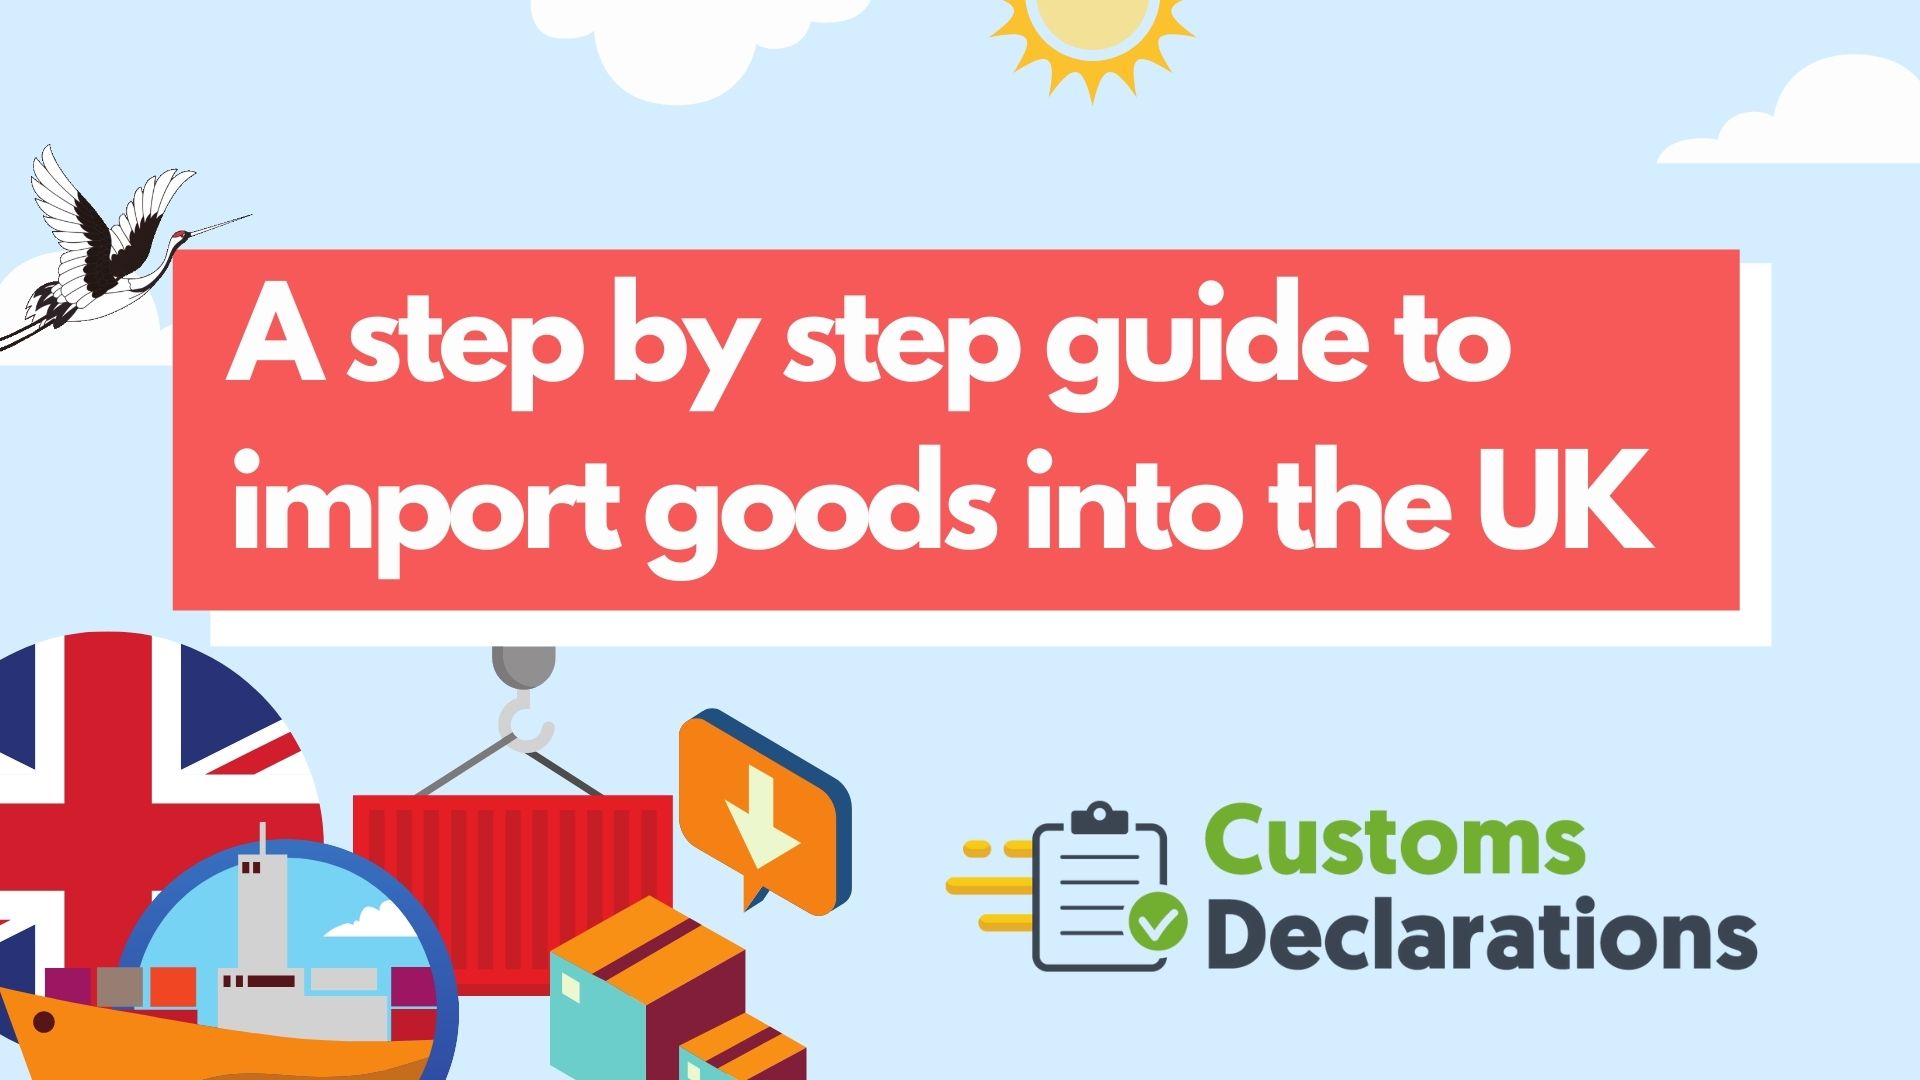 A step by step guide to import goods into the UK